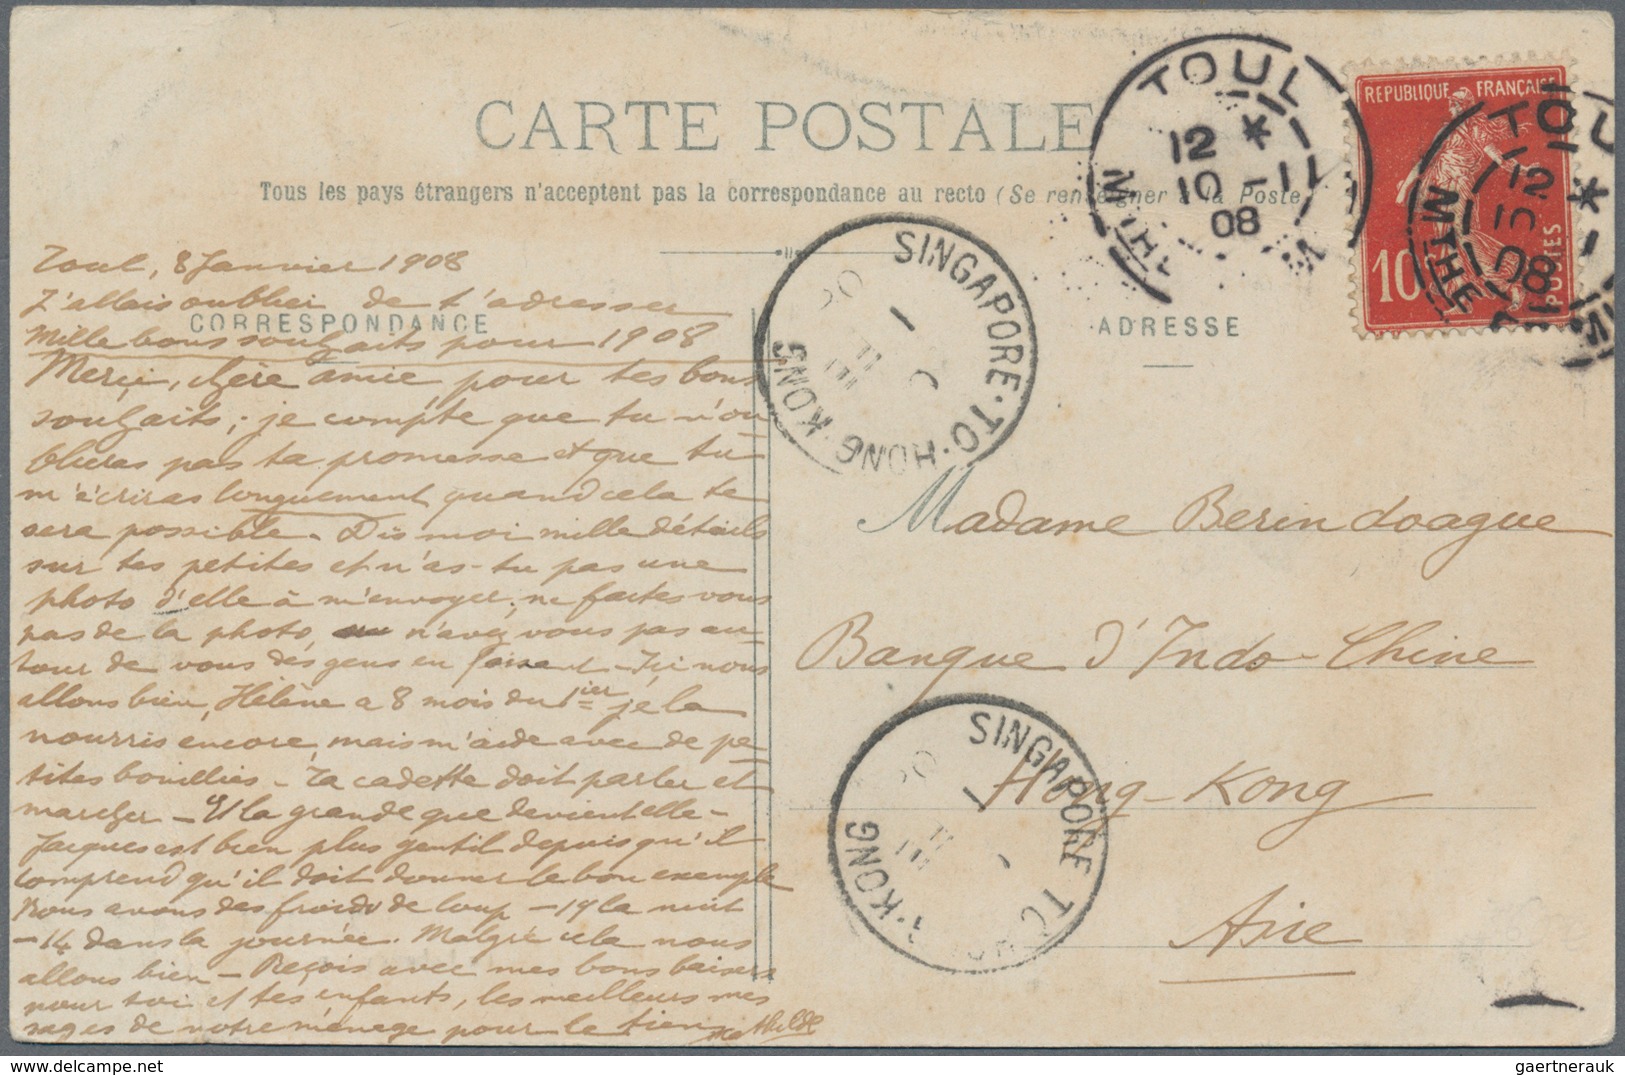 Singapur: 1908, "SINGAPORE TO HONG KONG C 1 FE 08", Marine Sorter On Ppc From France "TOUL 10-1-08" - Singapour (...-1959)